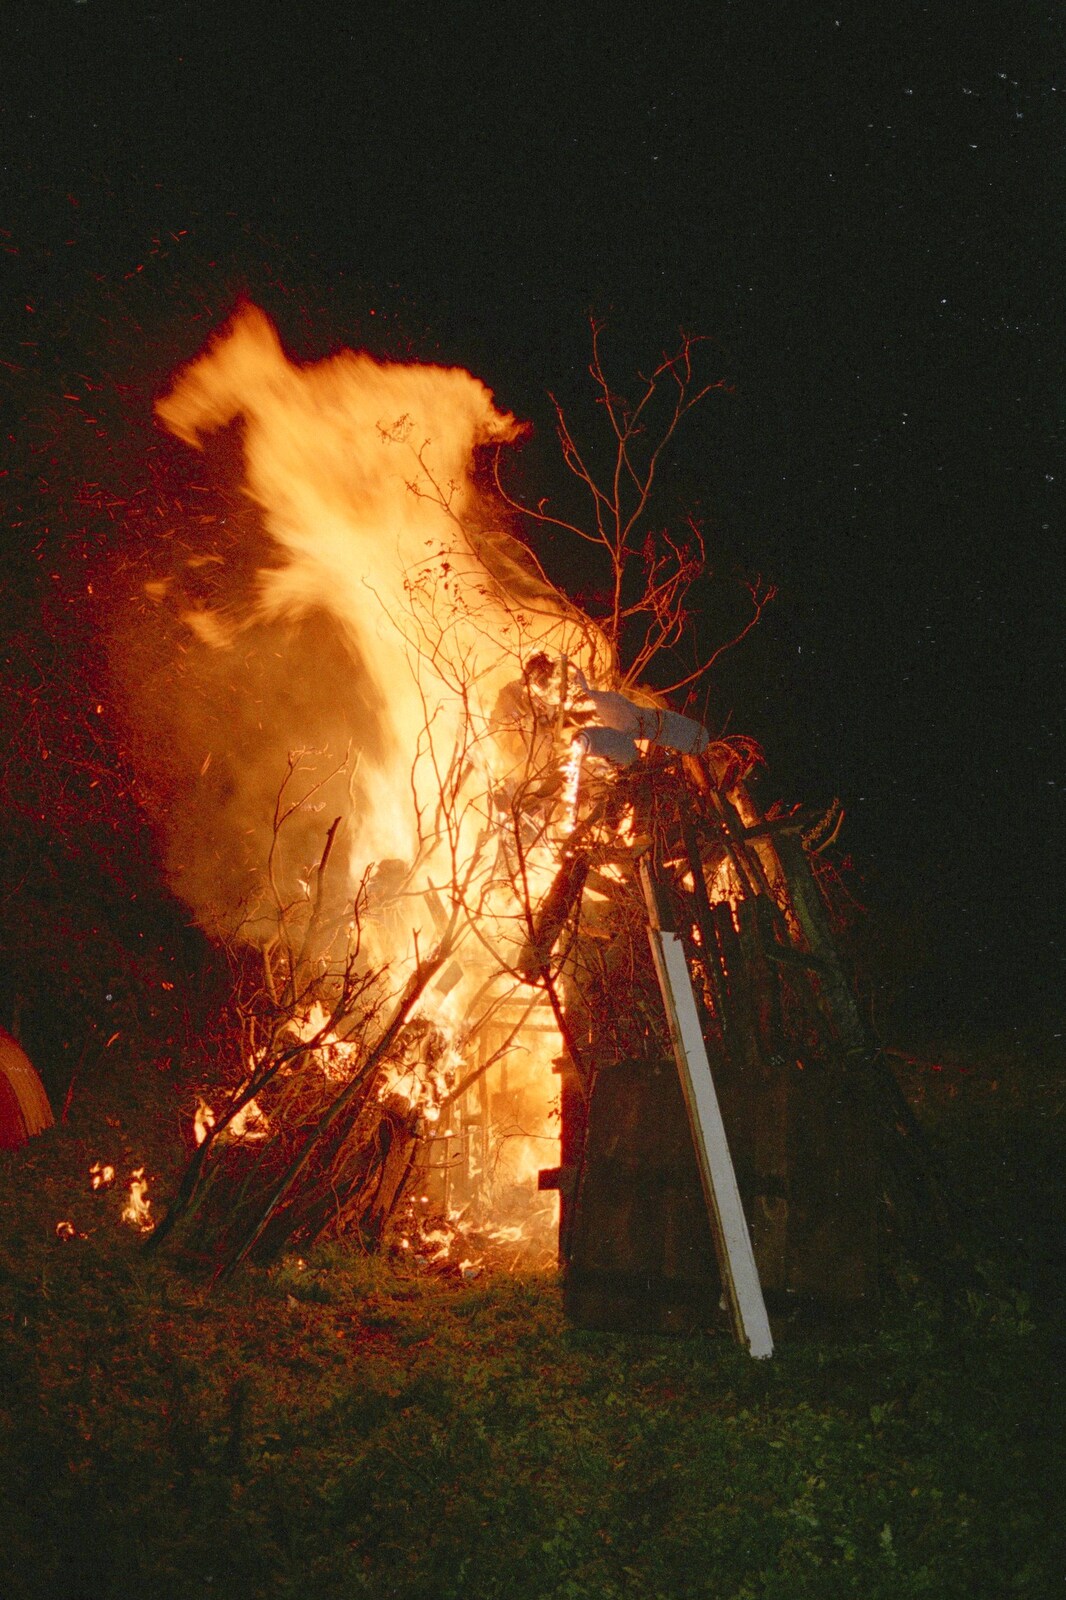 The bonfire goes up quickly from Bonfire Night, Stuston, Suffolk - 5th November 1990